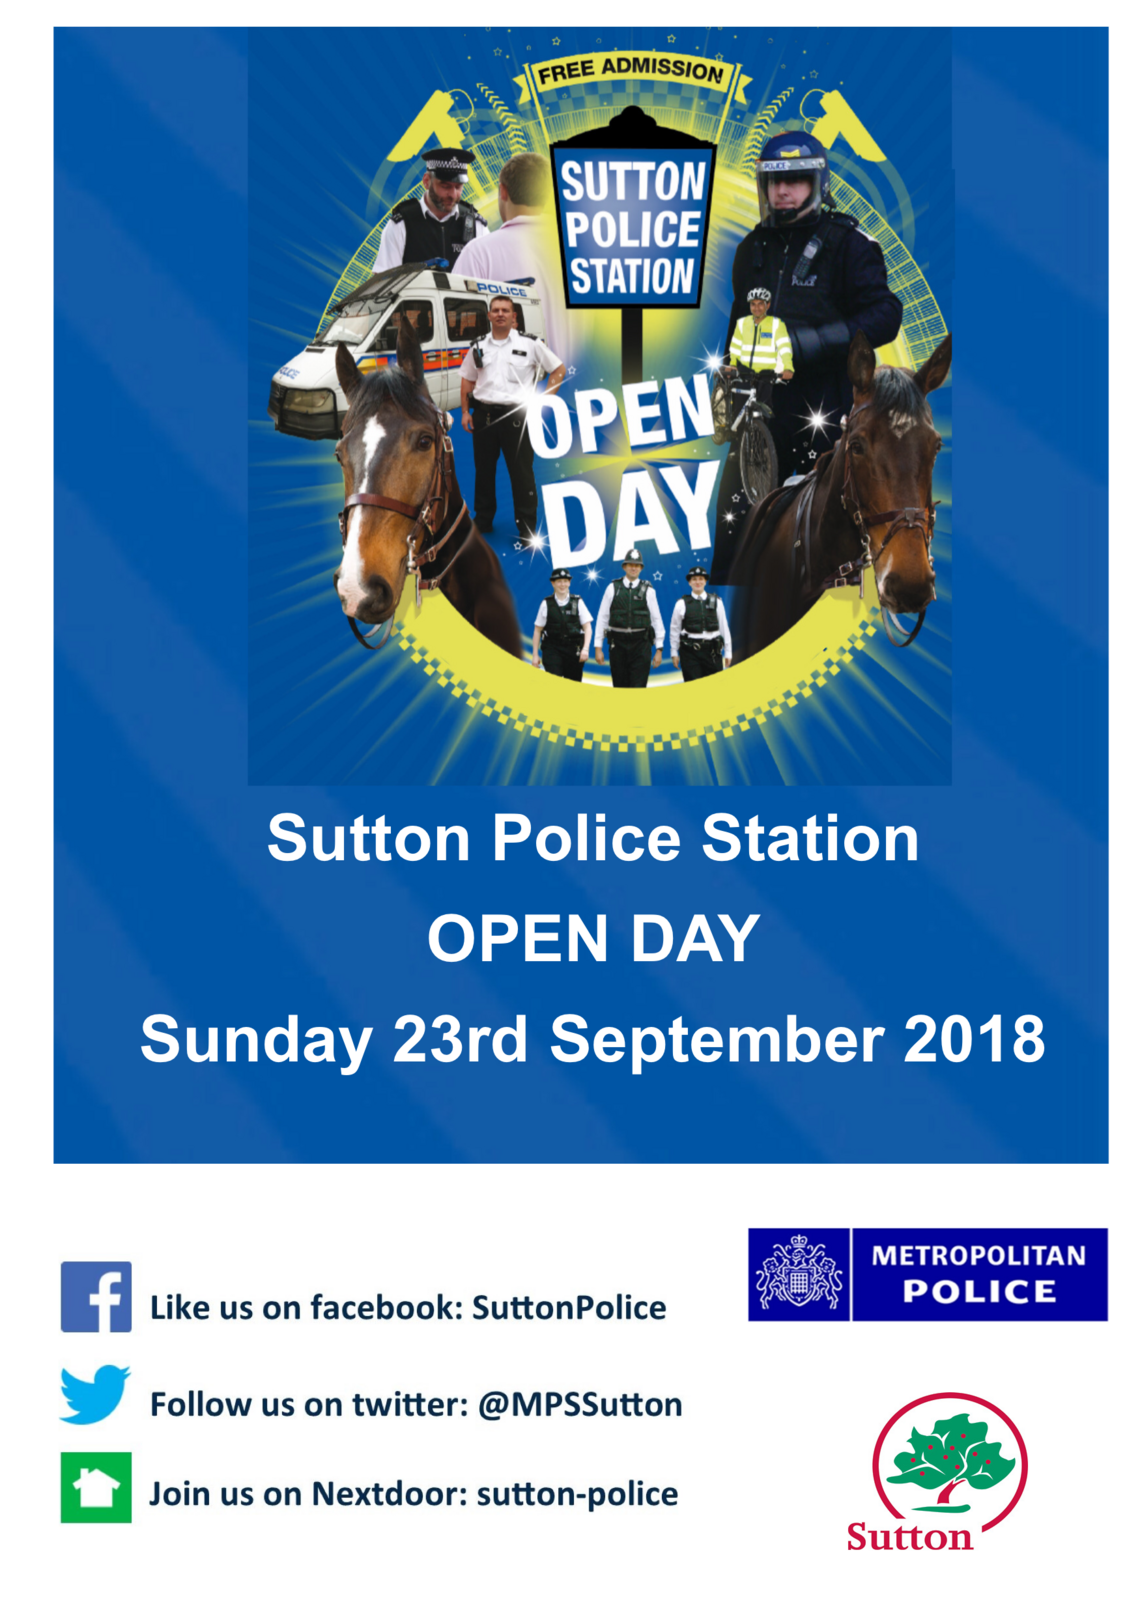 
Sutton Police Station Open Day Poster